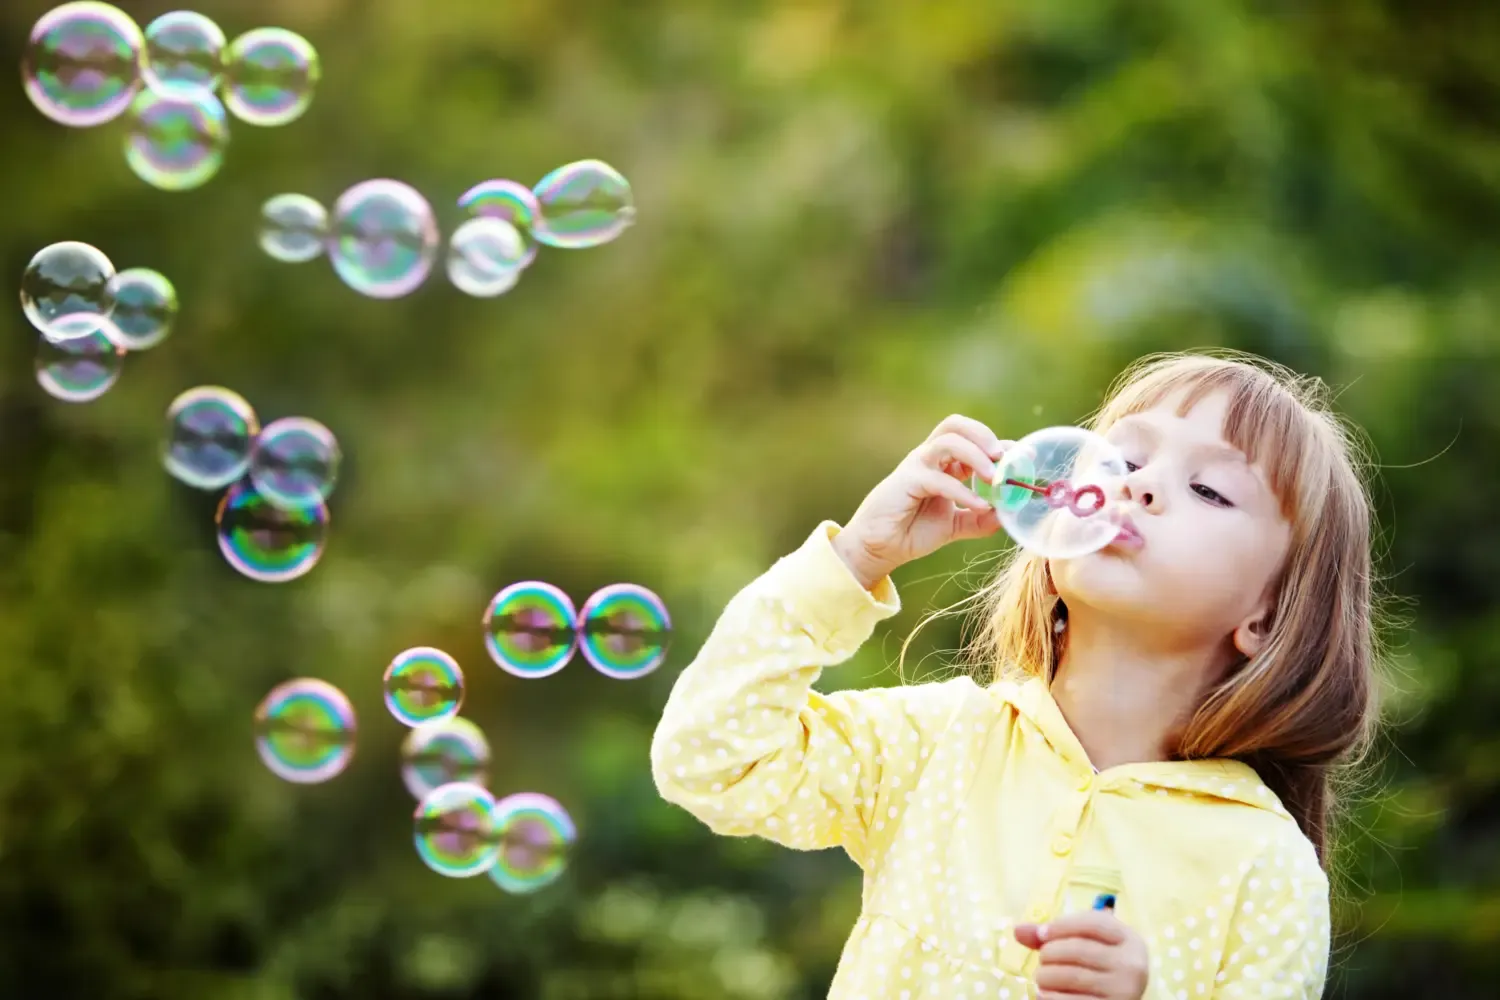 Young girl blowing bubbles.